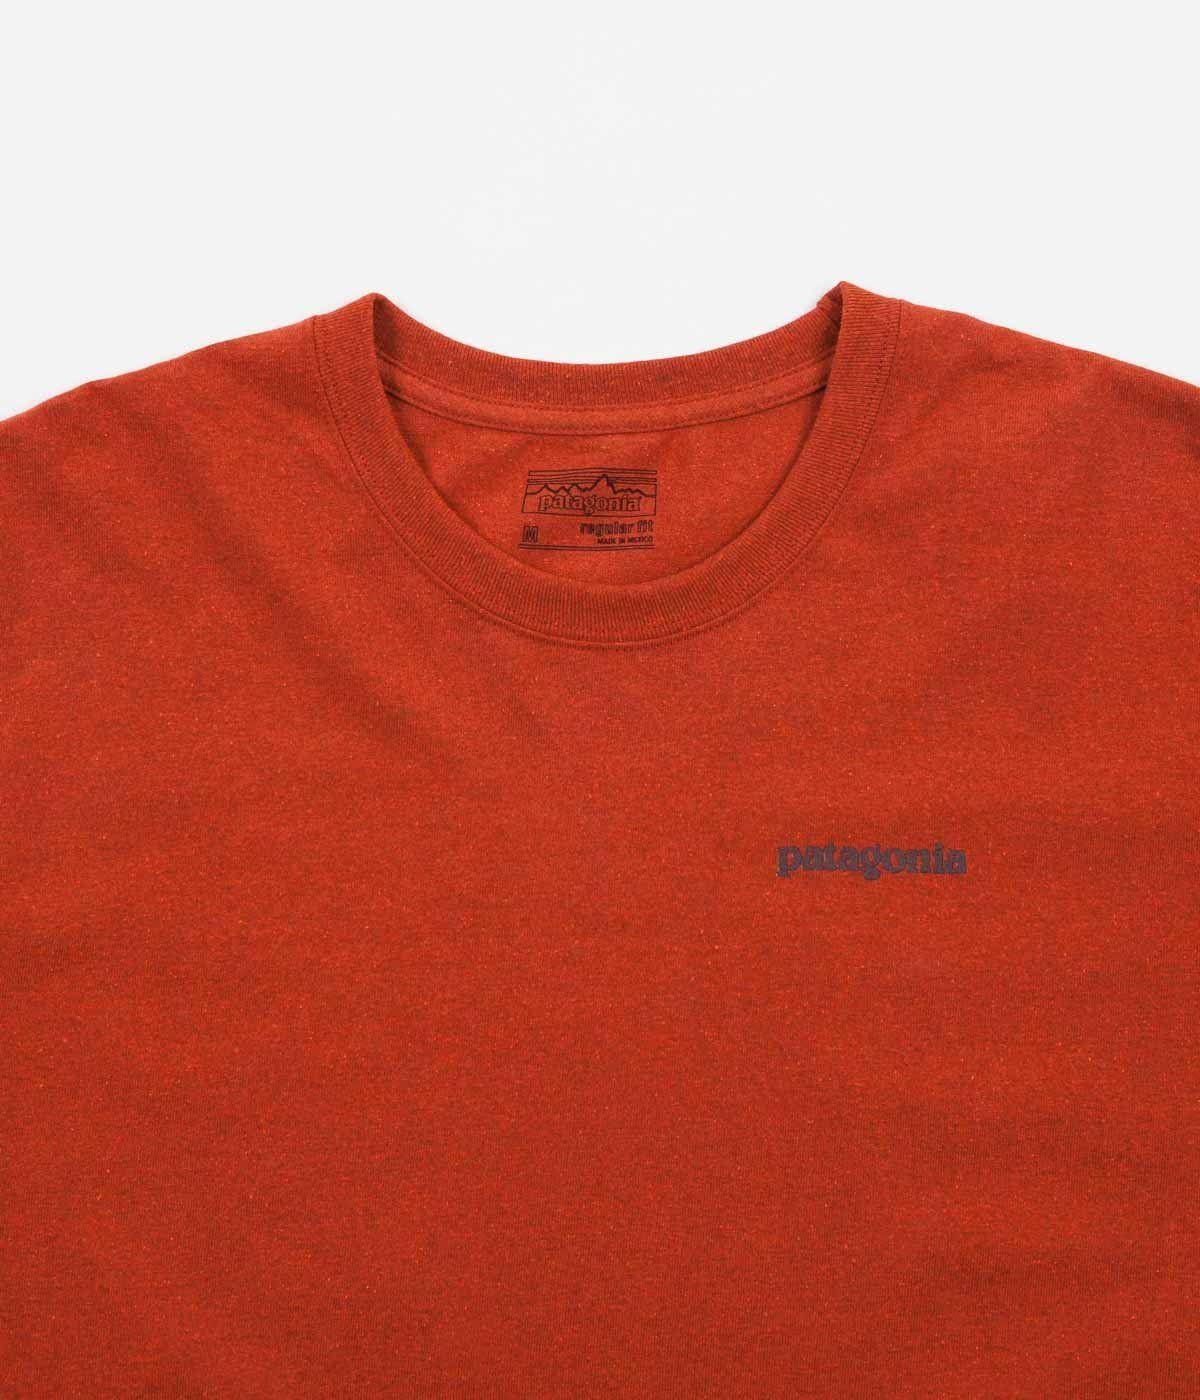 Red Roots Logo - Patagonia Text Logo Long Sleeve T-Shirt - Roots Red | Flatspot